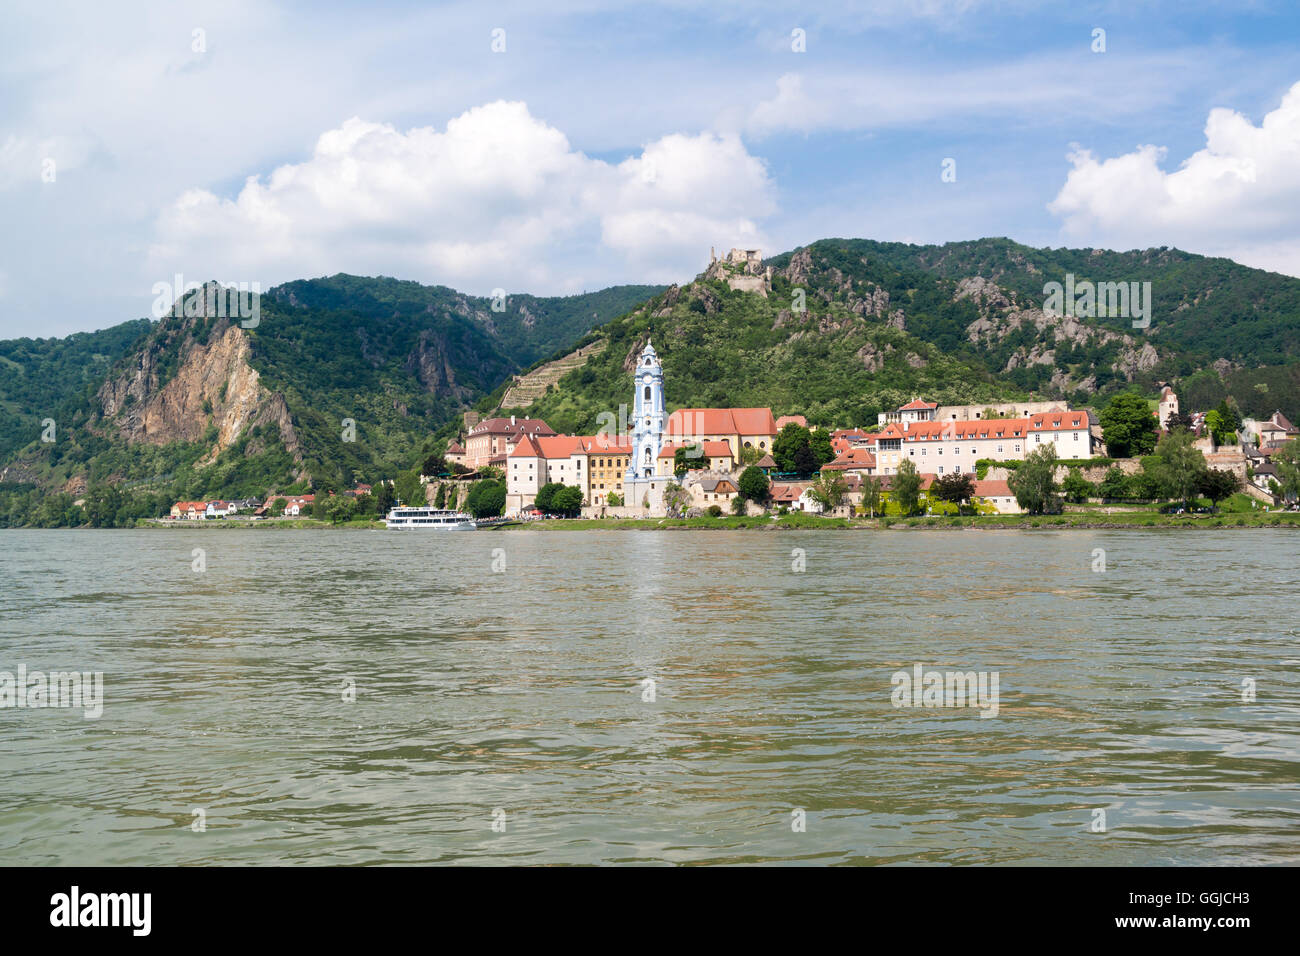 Town of Durnstein with abbey and old castle from Danube river, Wachau Valley, Lower Austria Stock Photo